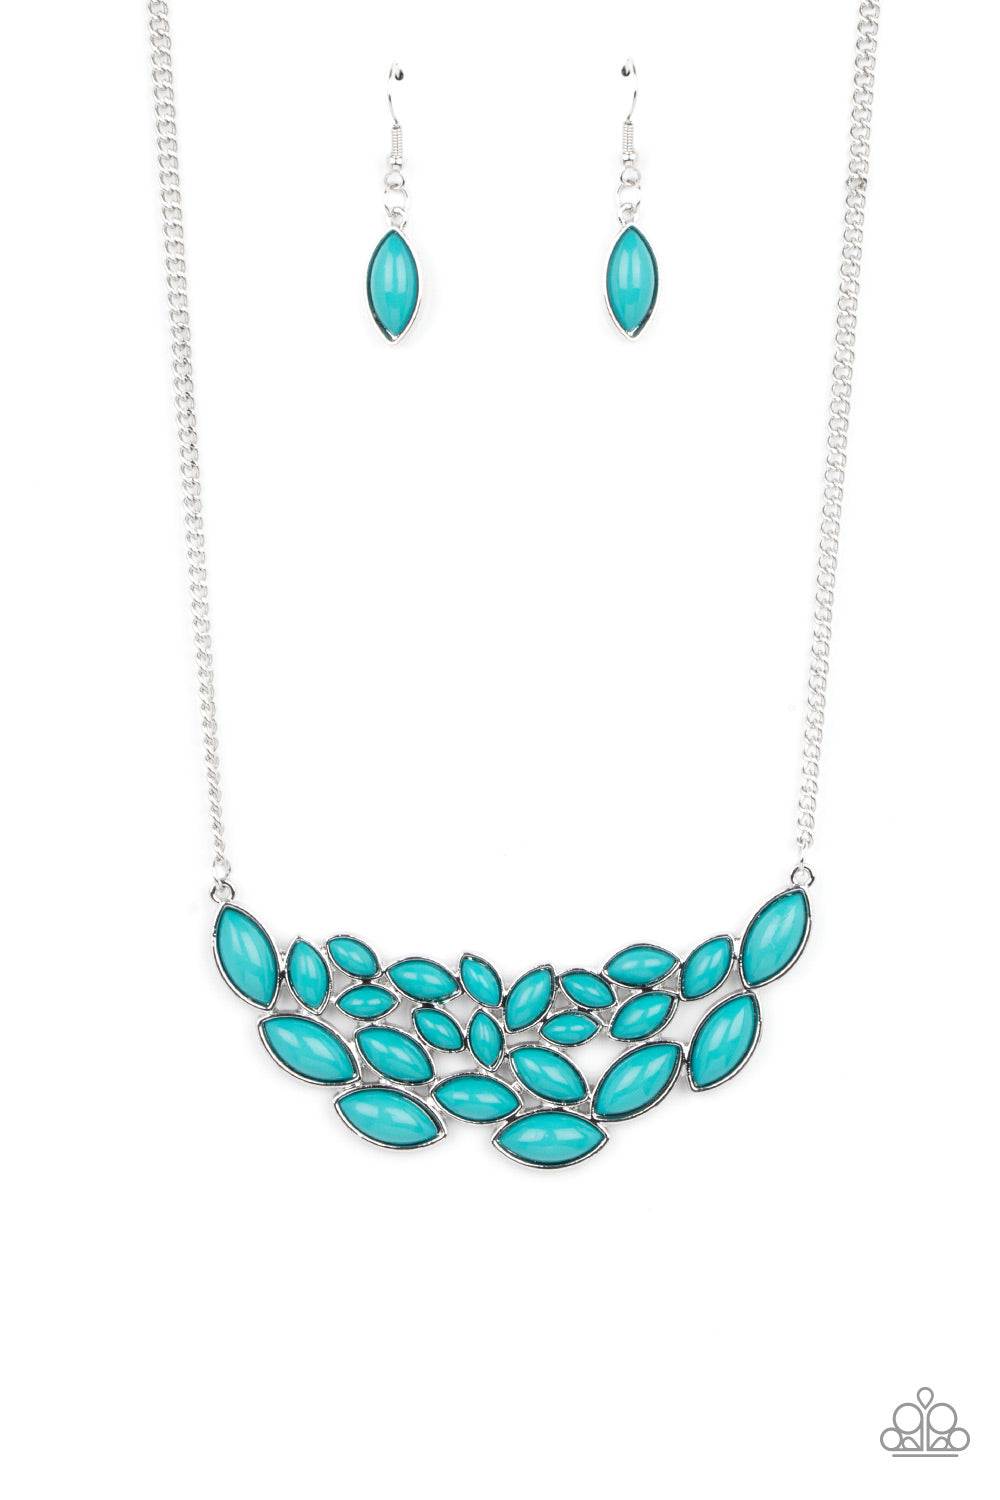 Eden Escape Blue Necklace - Paparazzi Accessories   Encased in sleek silver frames, a collection of marquise shaped blue beads delicately coalesce into a leafy pendant below the collar for a whimsical pop of color. Features an adjustable clasp closure.  ﻿All Paparazzi Accessories are lead free and nickel free!  Sold as one individual necklace. Includes one pair of matching earrings.